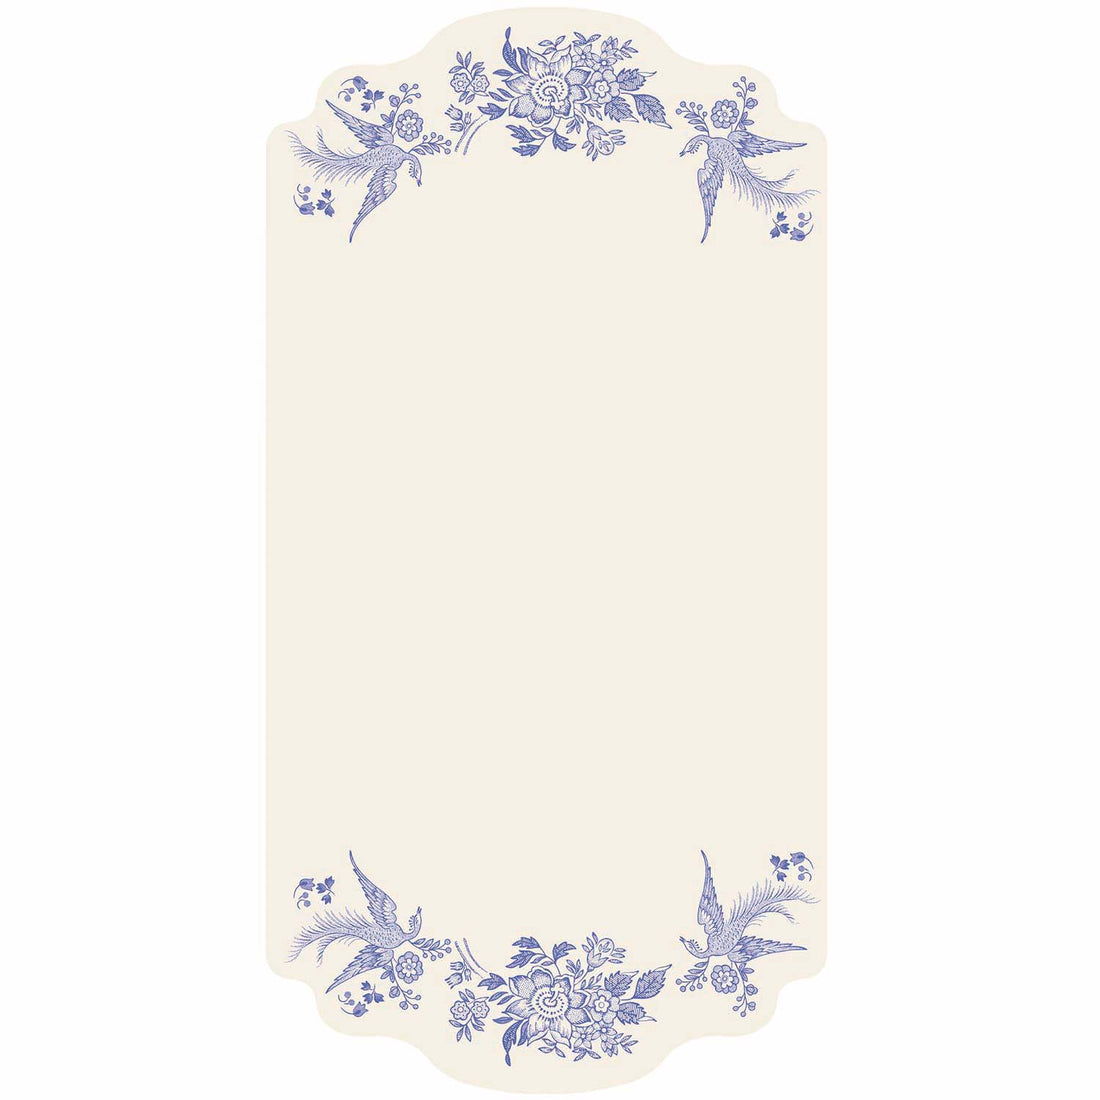 A Hester &amp; Cook Blue Asiatic Pheasants Table Card with a floral design.